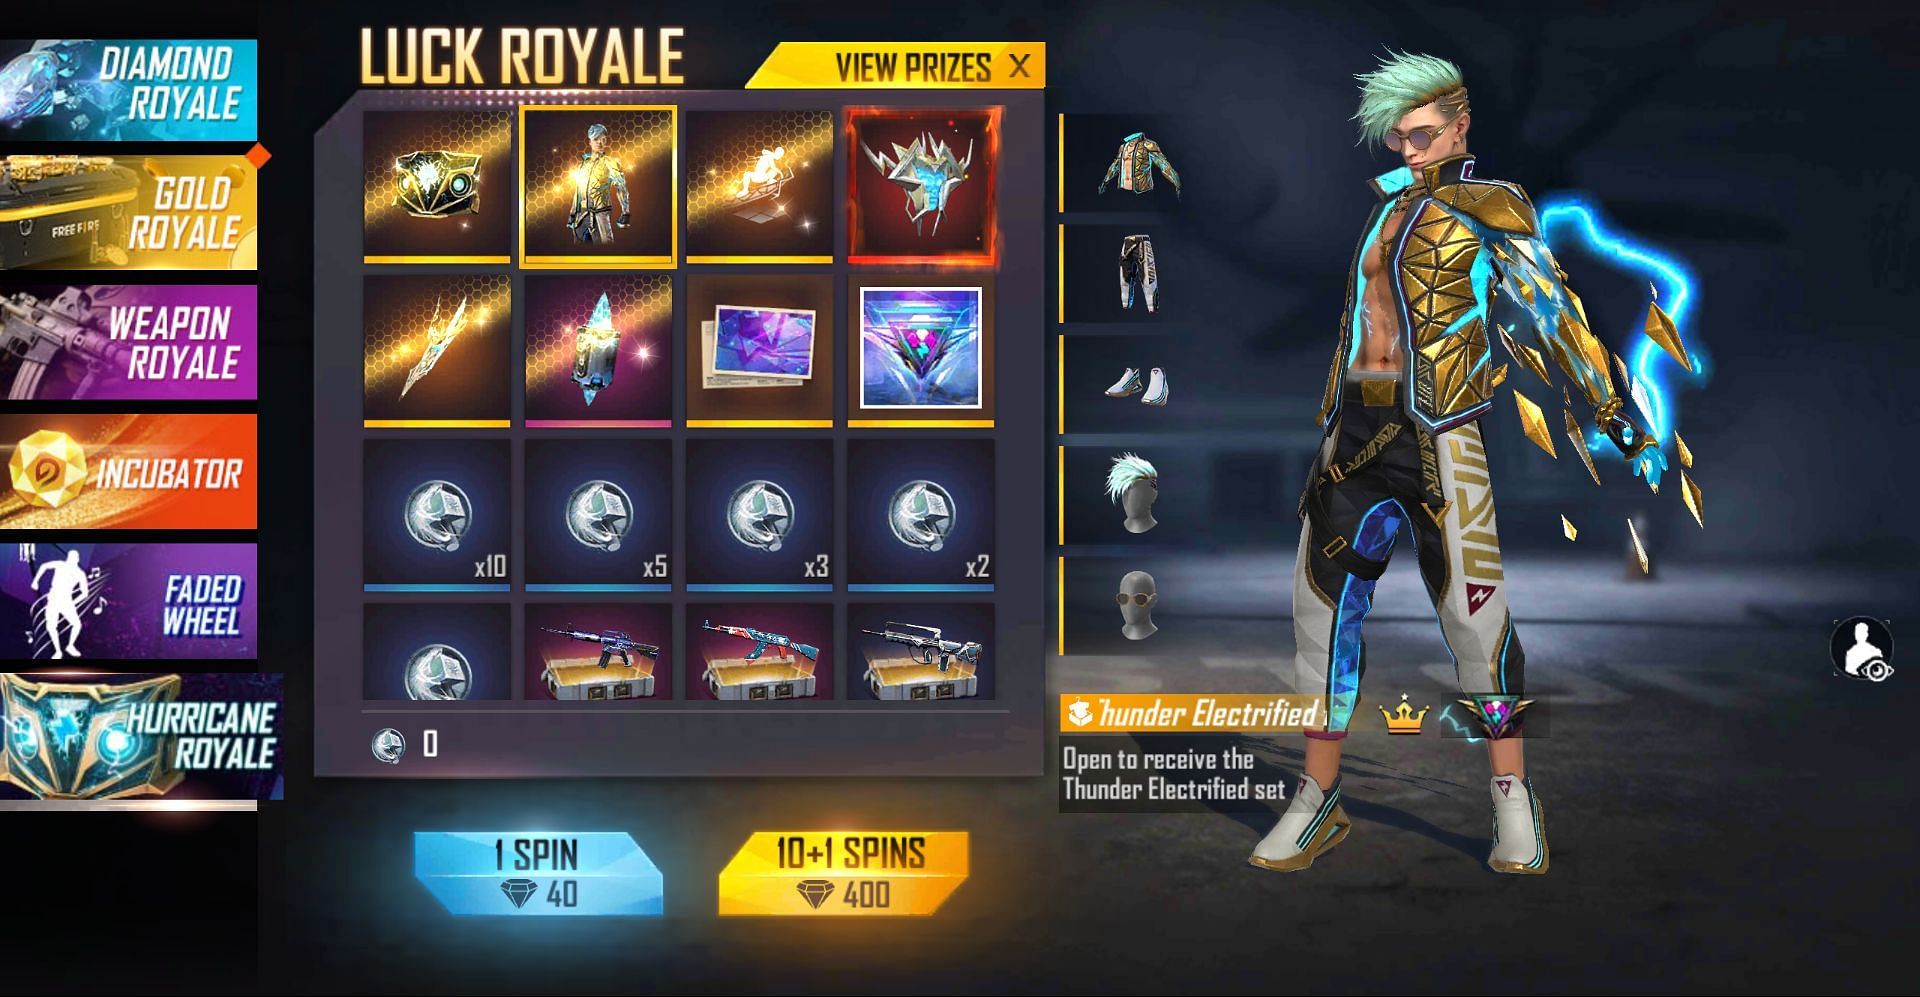 The prize pool in the Luck Royale (Image via Garena)